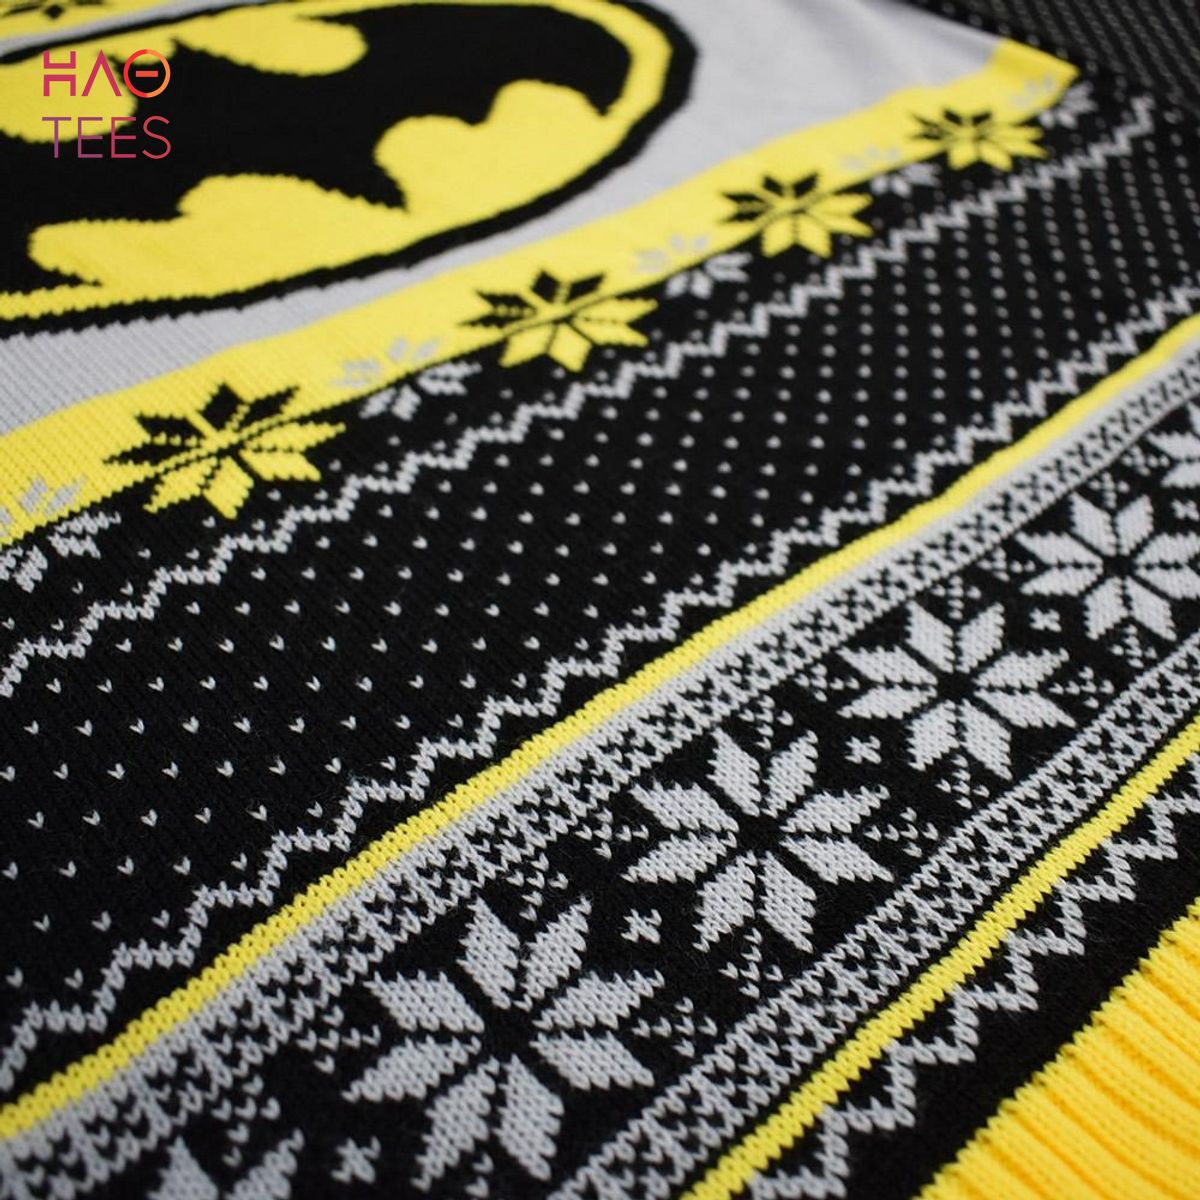 BEST Batman Knitted Ugly Christmas Sweater All Over Print Sweatshirt Ugly